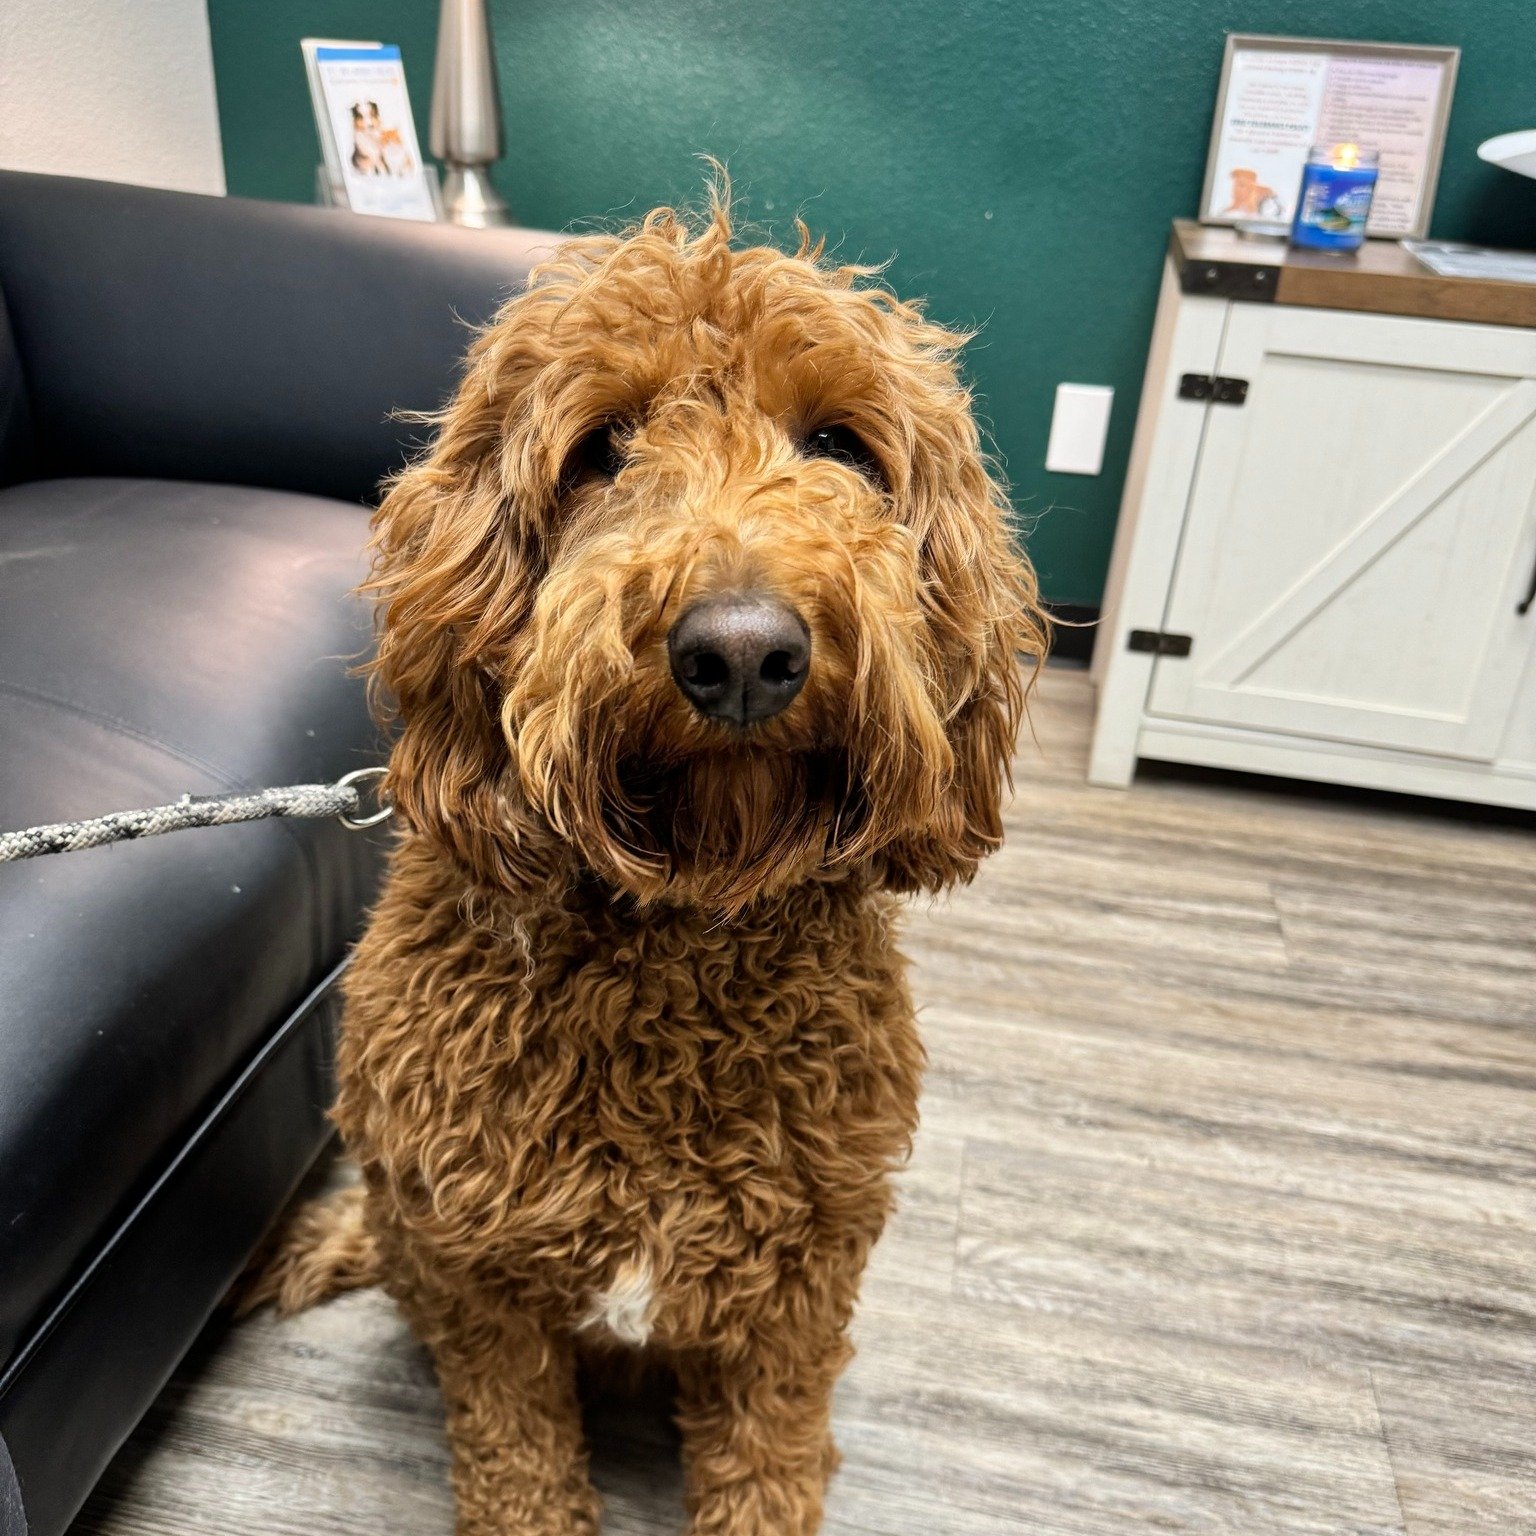 ✨Pet of The Week✨

Meet adorable KJ! 🐾 This 2-year-old Golden Doodle is as sweet as can be, but she's here with us today in urgent care for a chronic ear infection. 🩺 Don't worry, though &ndash; with Dr. Brenner's expert detective skills, we're det